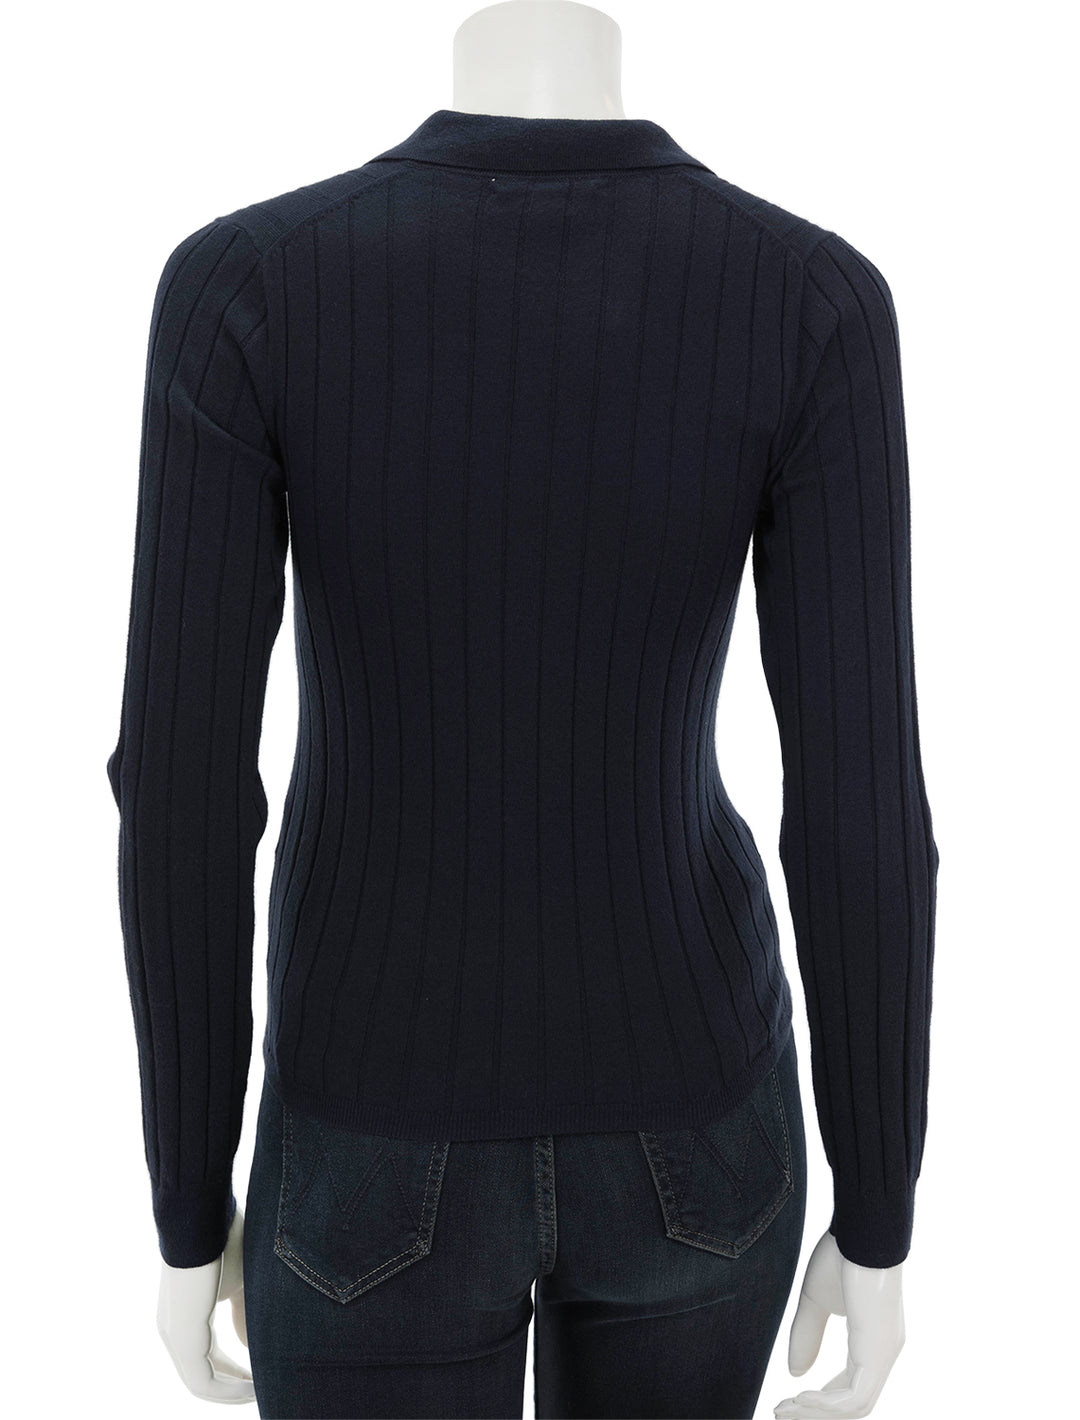 Back view of Alex Mill's Amanda Pullover in Neat Navy.